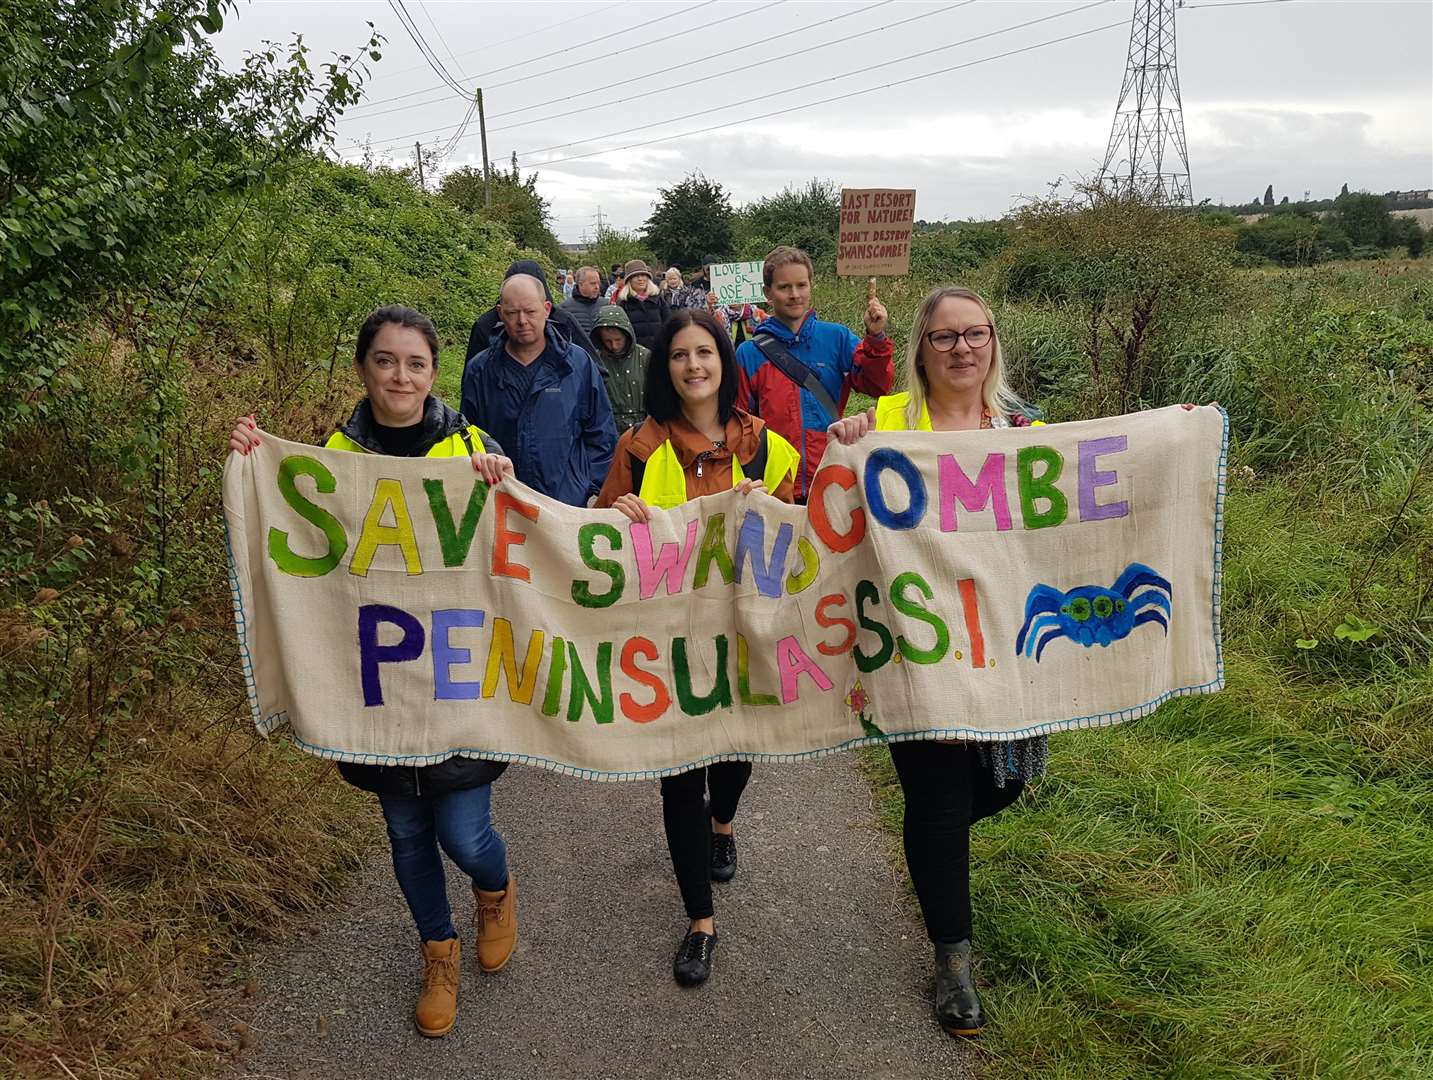 Campaigners are fighting plans to build a theme park on the Swanscombe Marshes. Photo: Save Swanscombe Peninsula